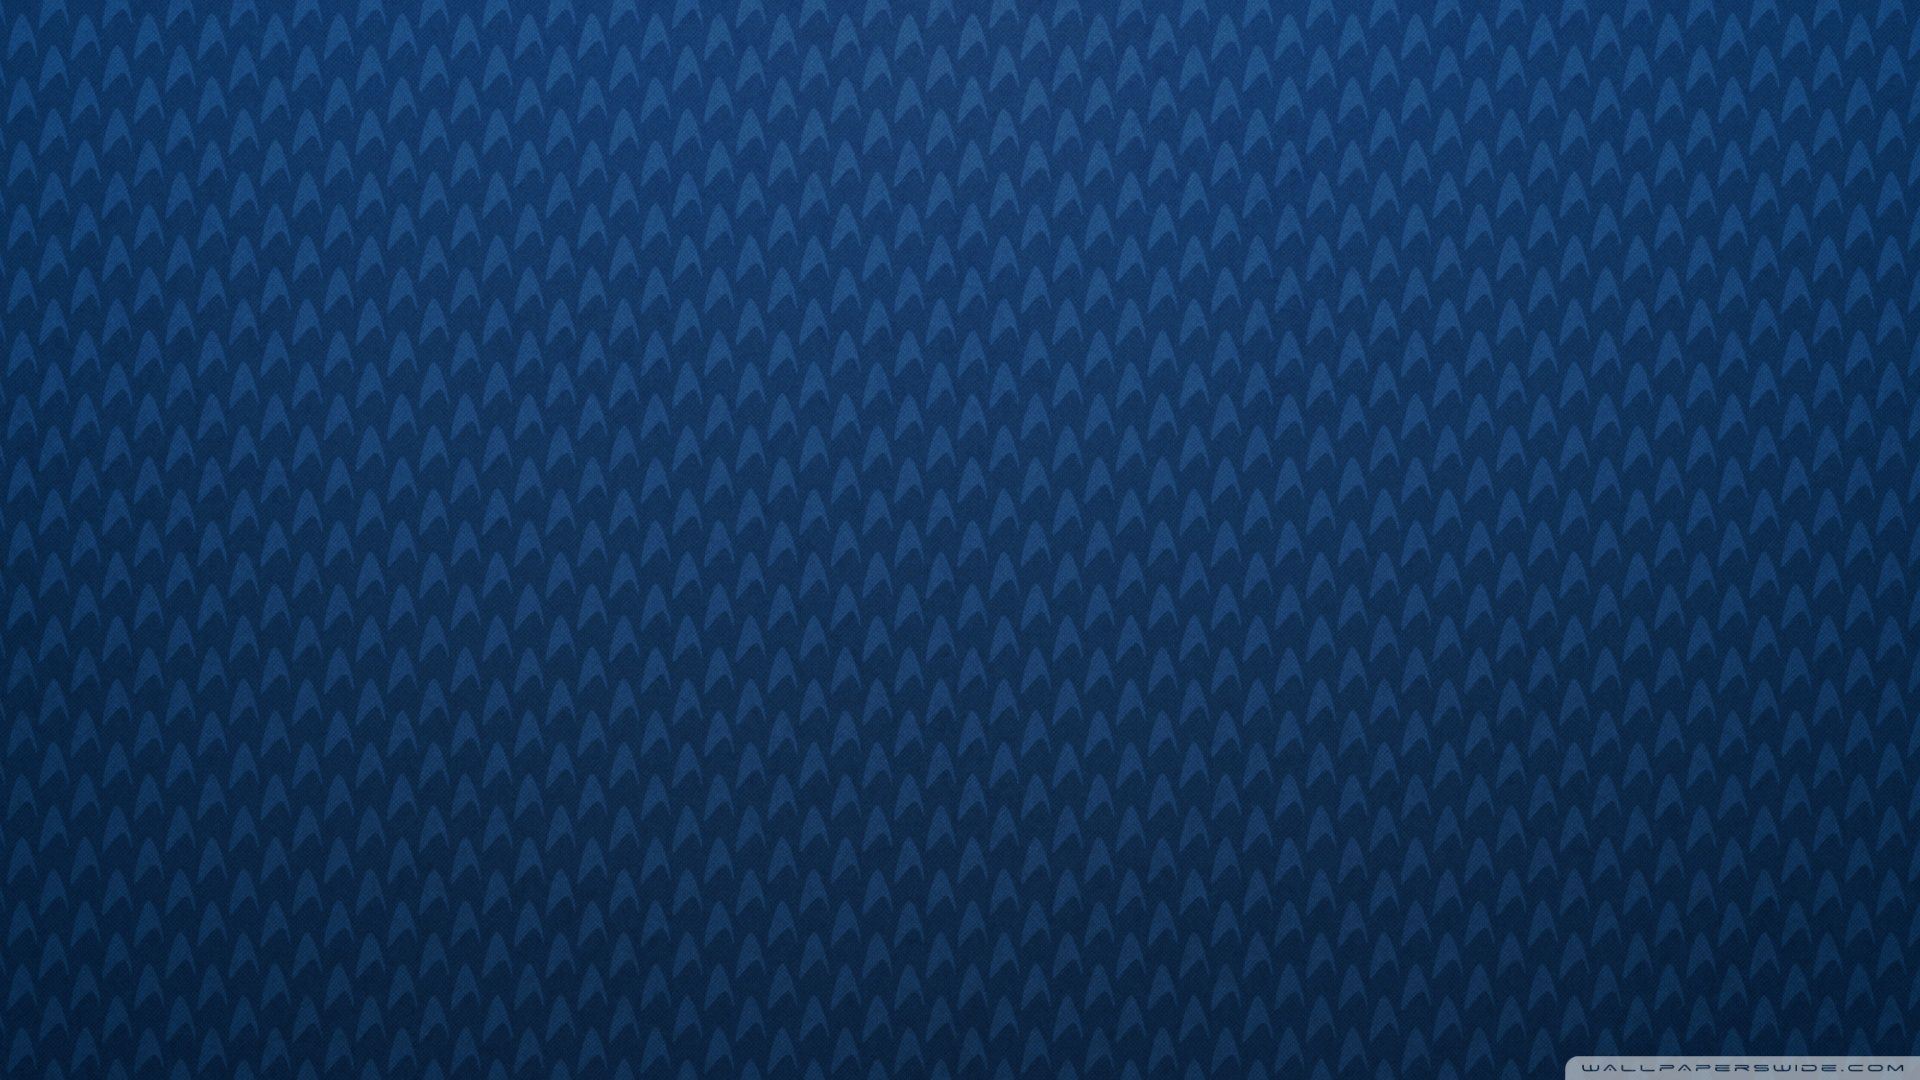 Free download wallpaper pattern fabric blue patterns image 1920x1080 [1920x1080] for your Desktop, Mobile & Tablet. Explore Blue Patterned Wallpaper. Navy Blue Patterned Wallpaper, Blue Love Wallpaper, Teal Blue Wallpaper